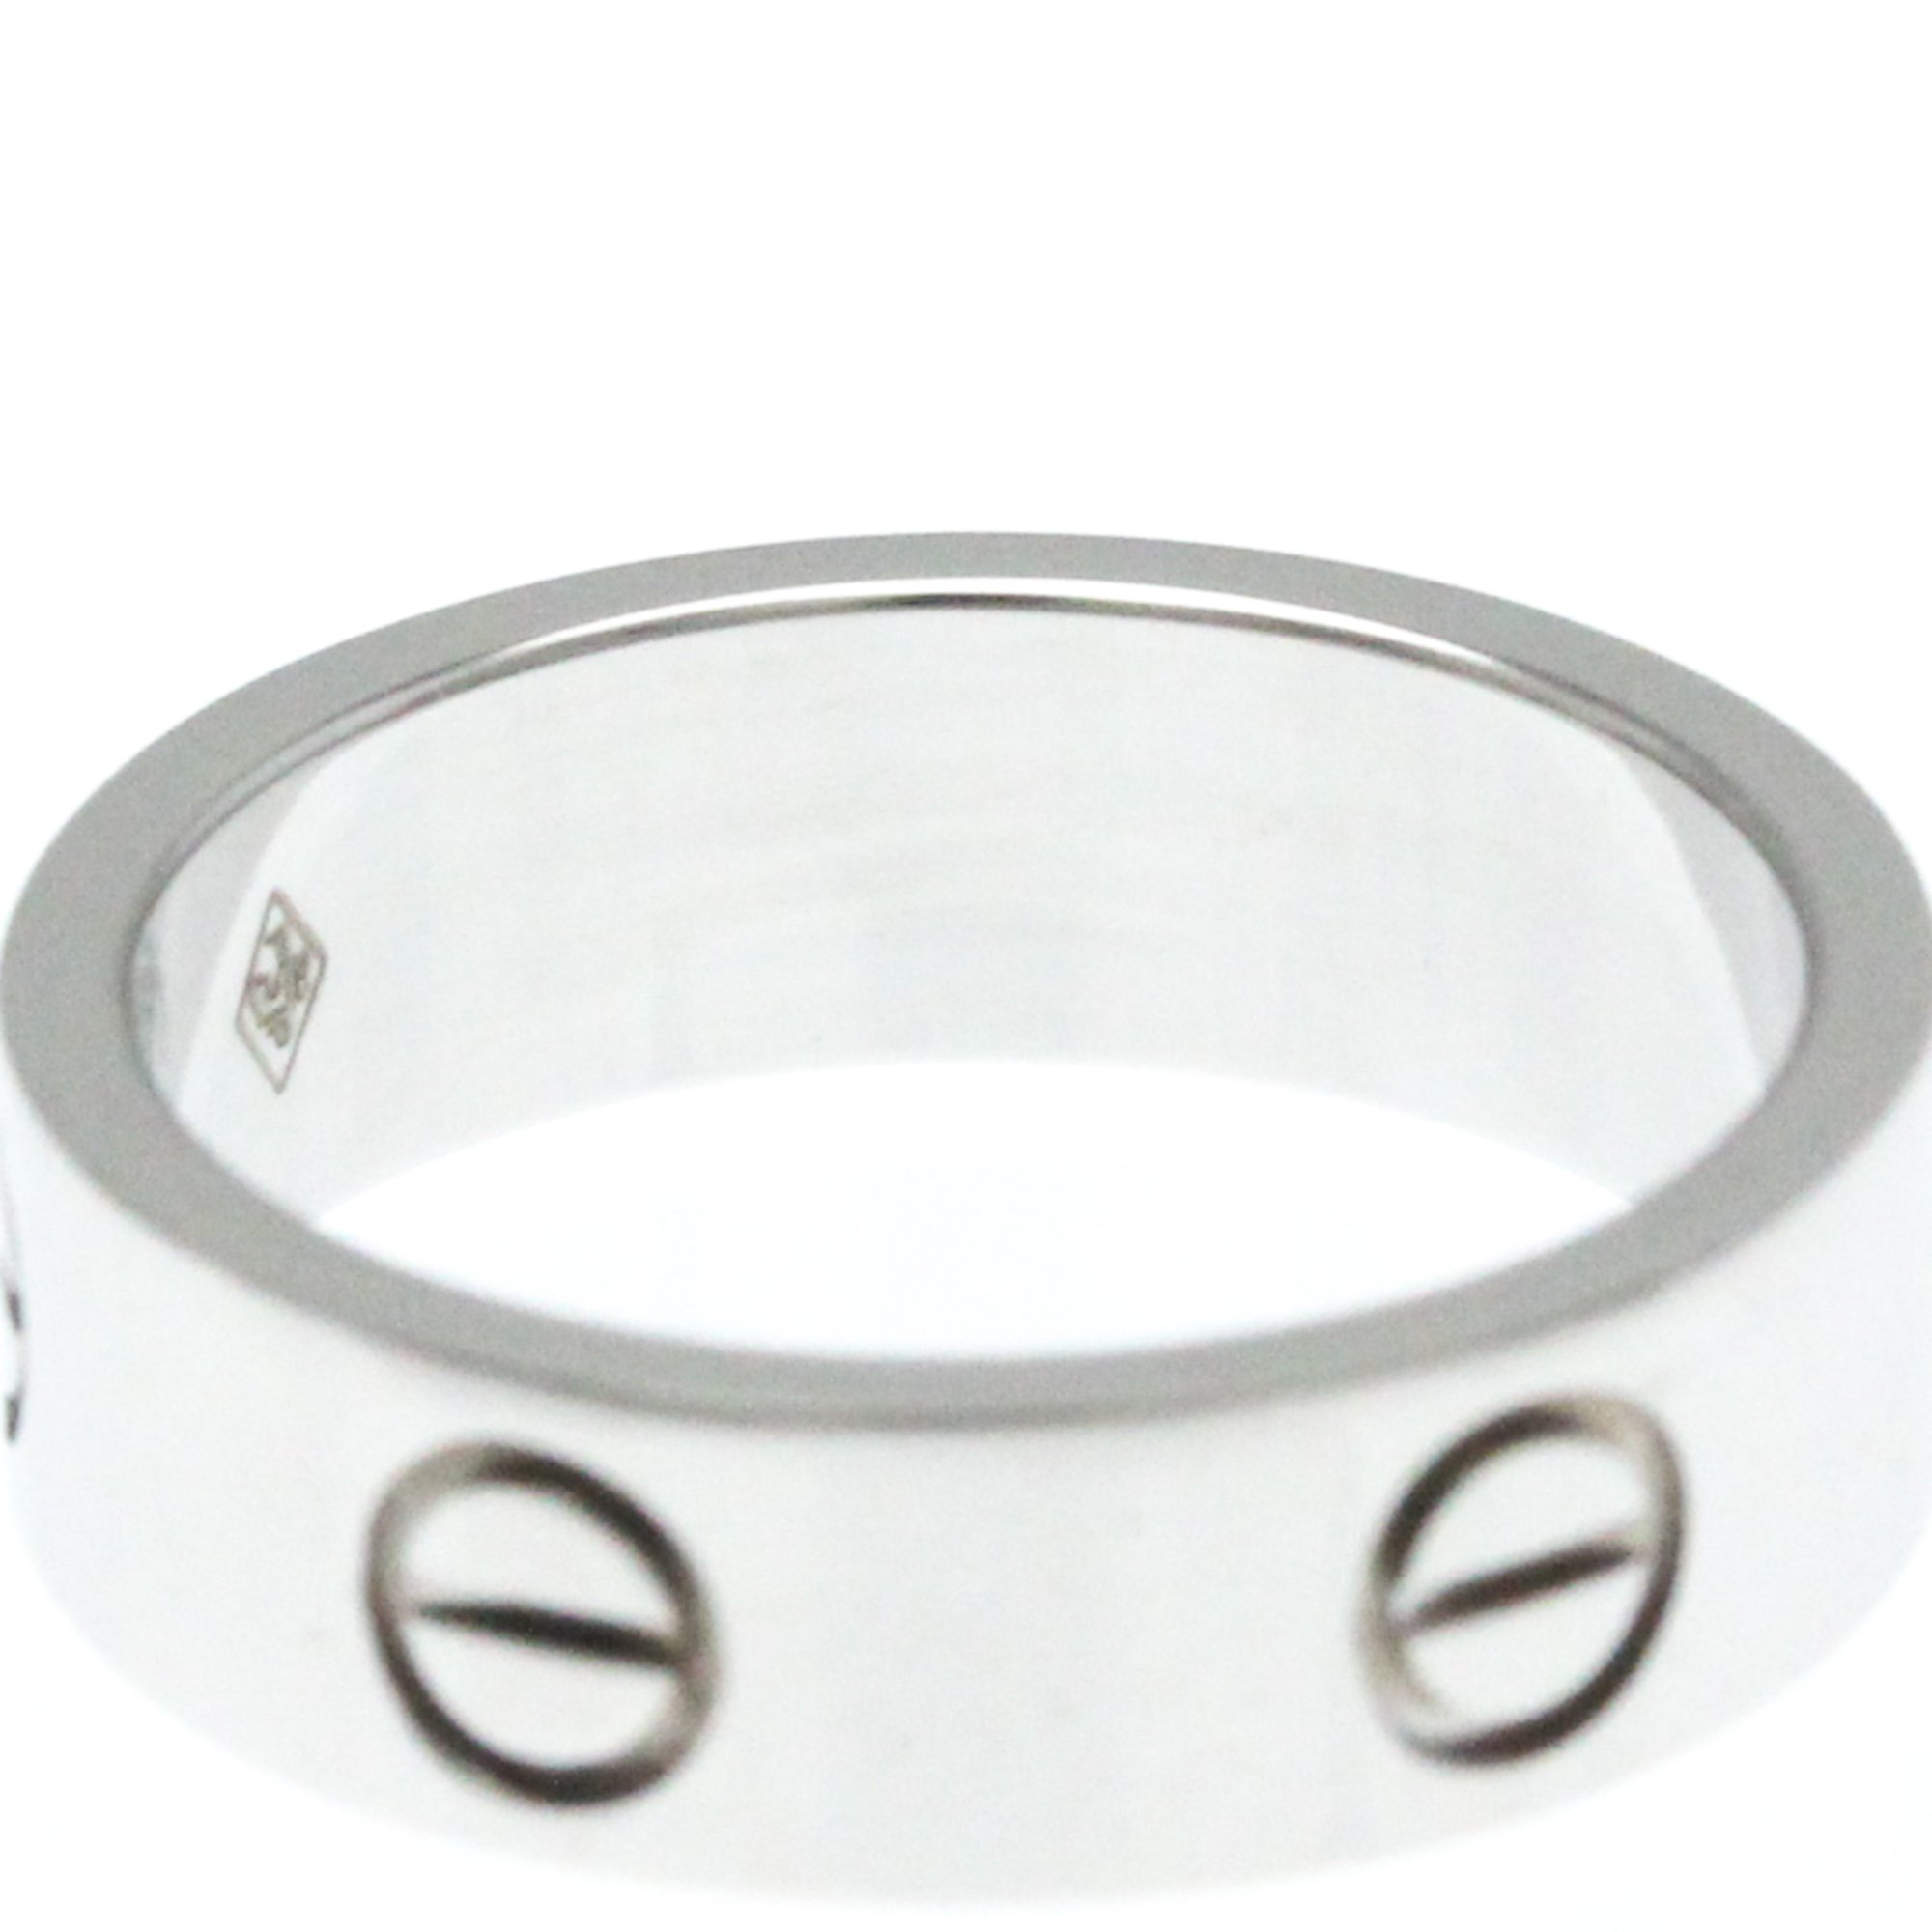 Cartier Love Love Ring White Gold (18K) Fashion No Stone Band Ring Silver